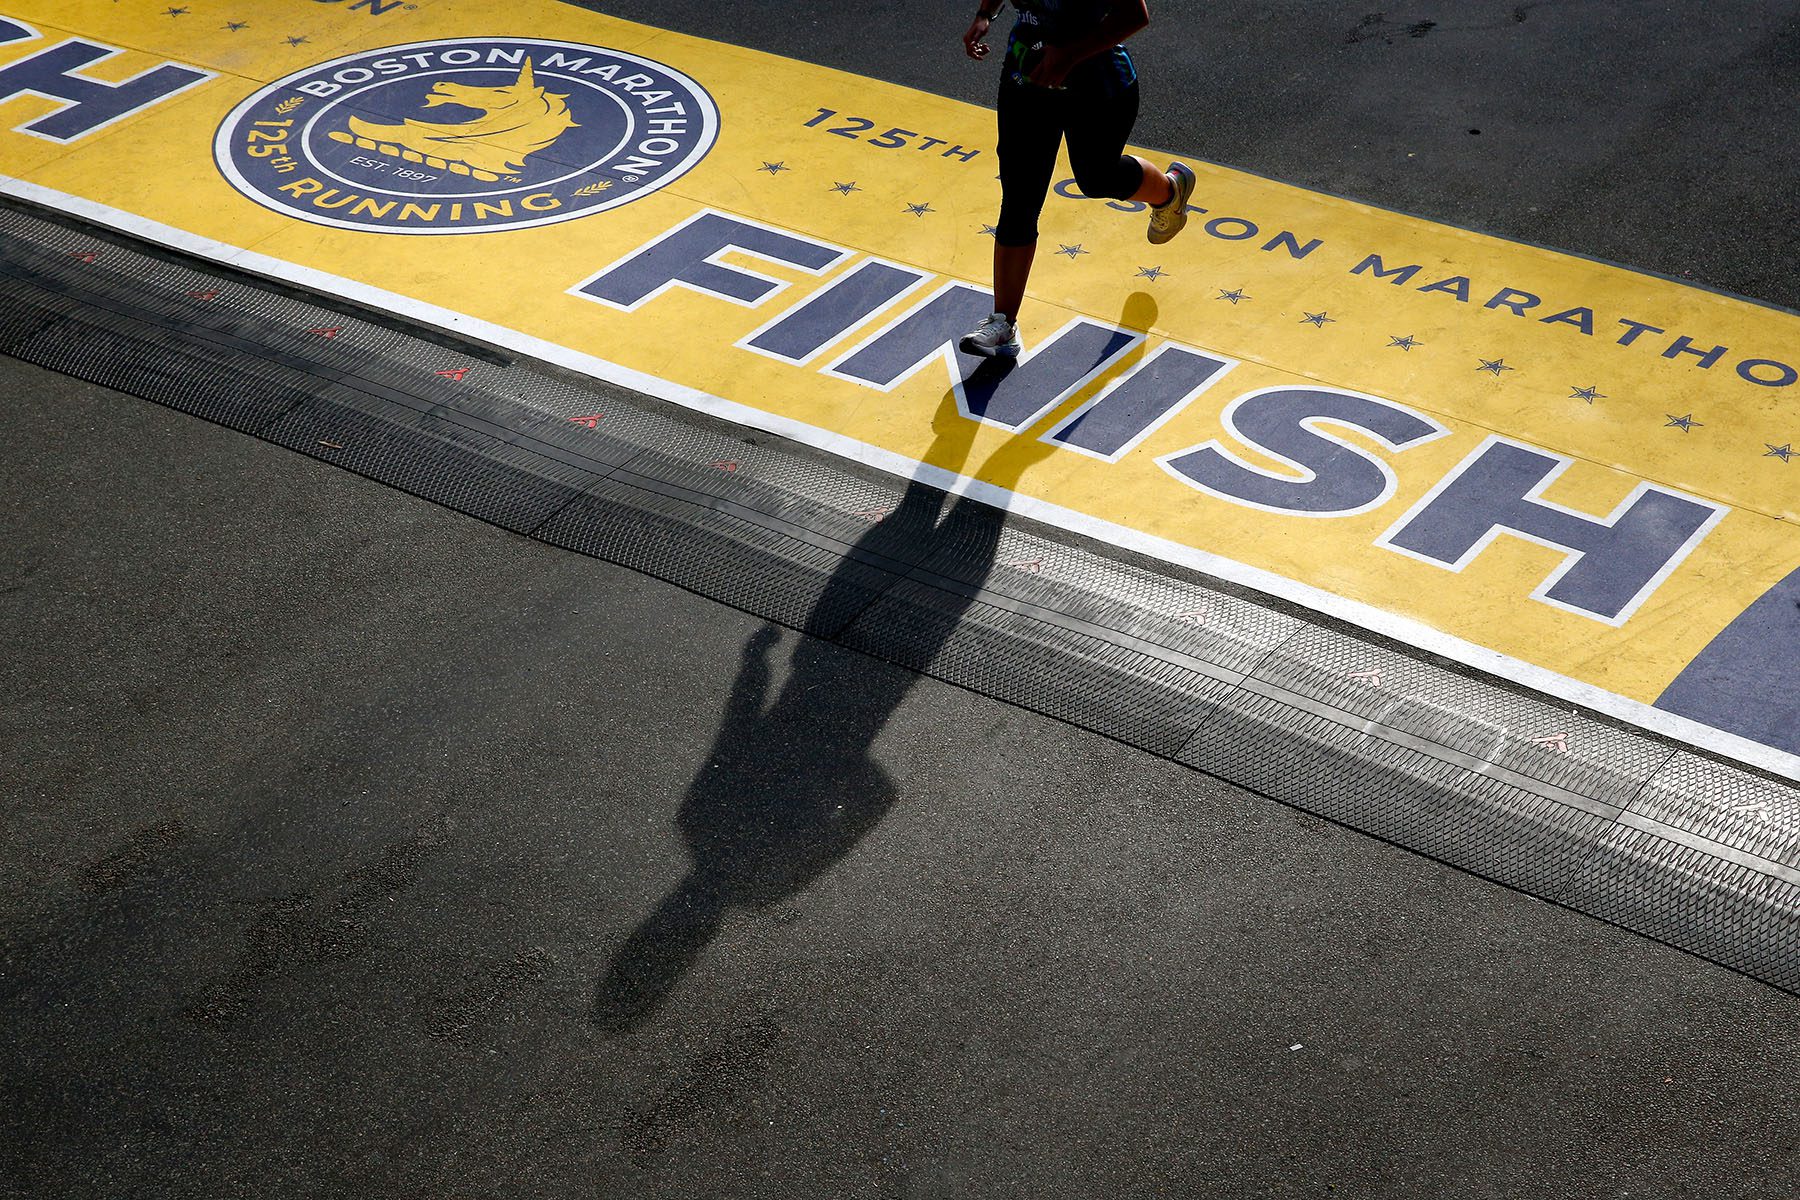 A runner casts a shadow as they cross the finish line of the 125th Boston Marathon.